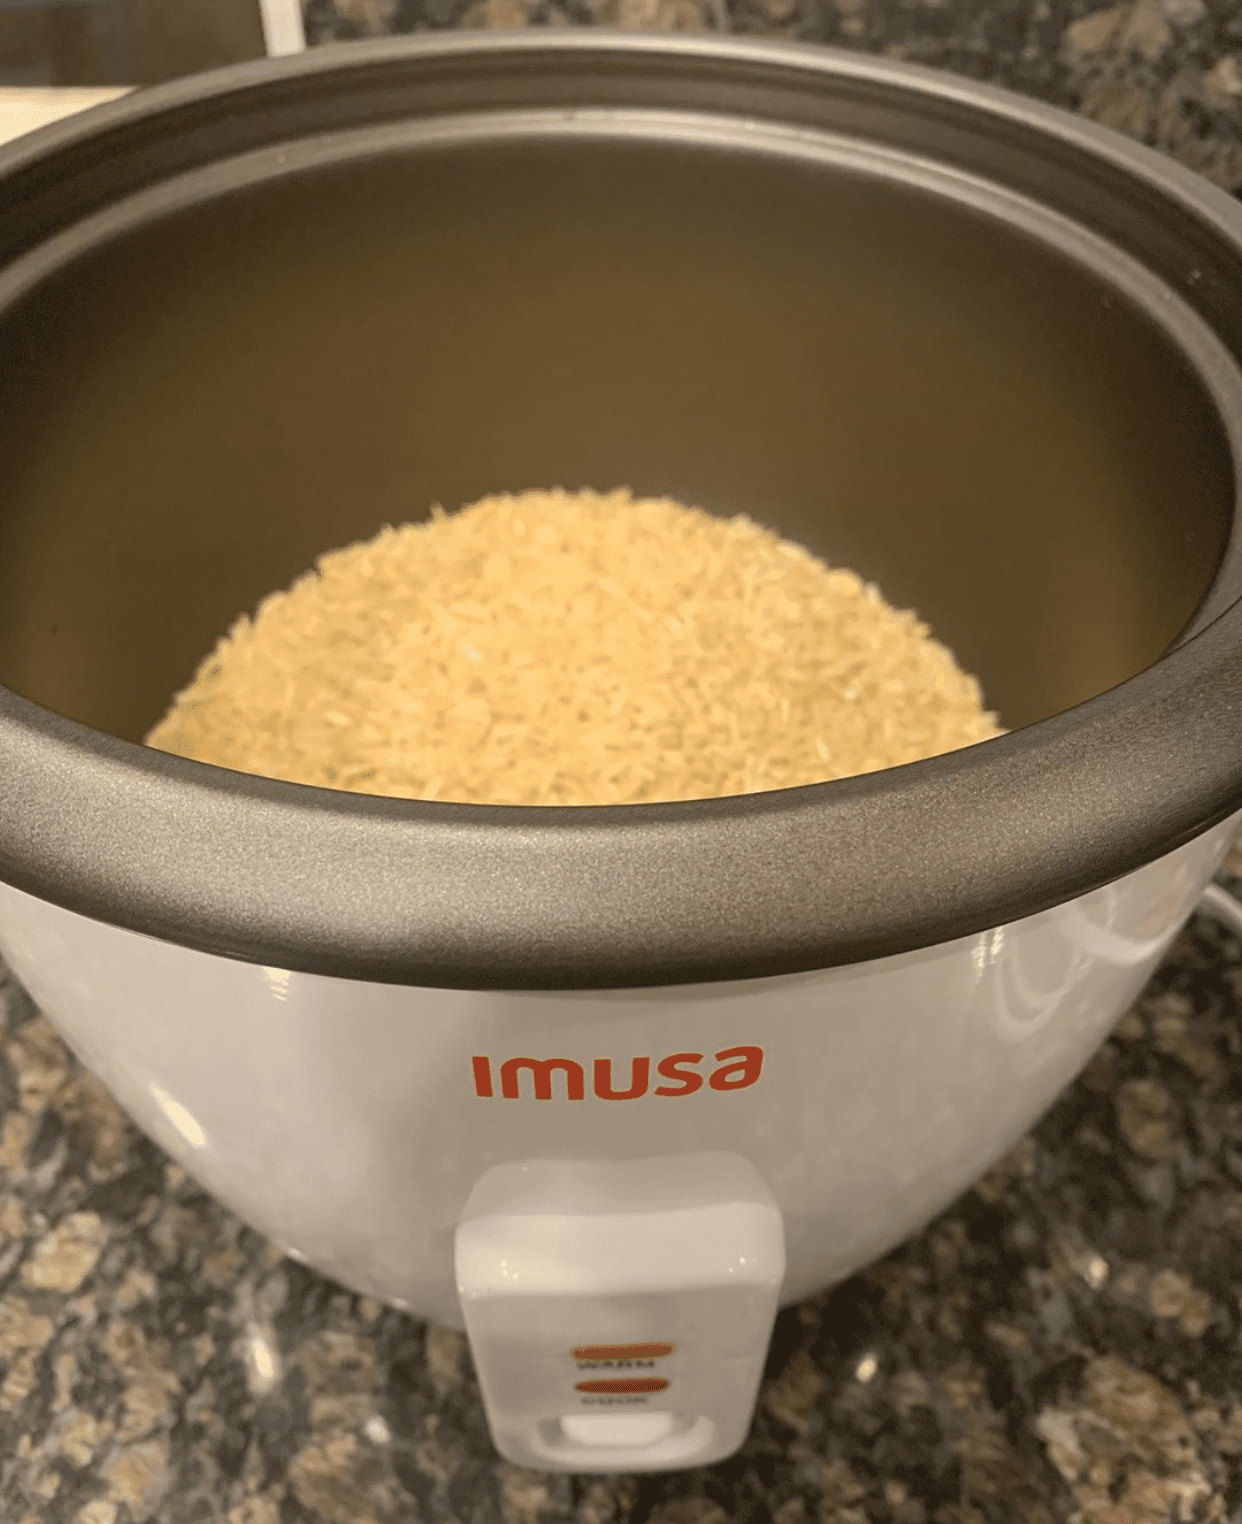 IMUSA - 8-Cup Rice Cooker - White